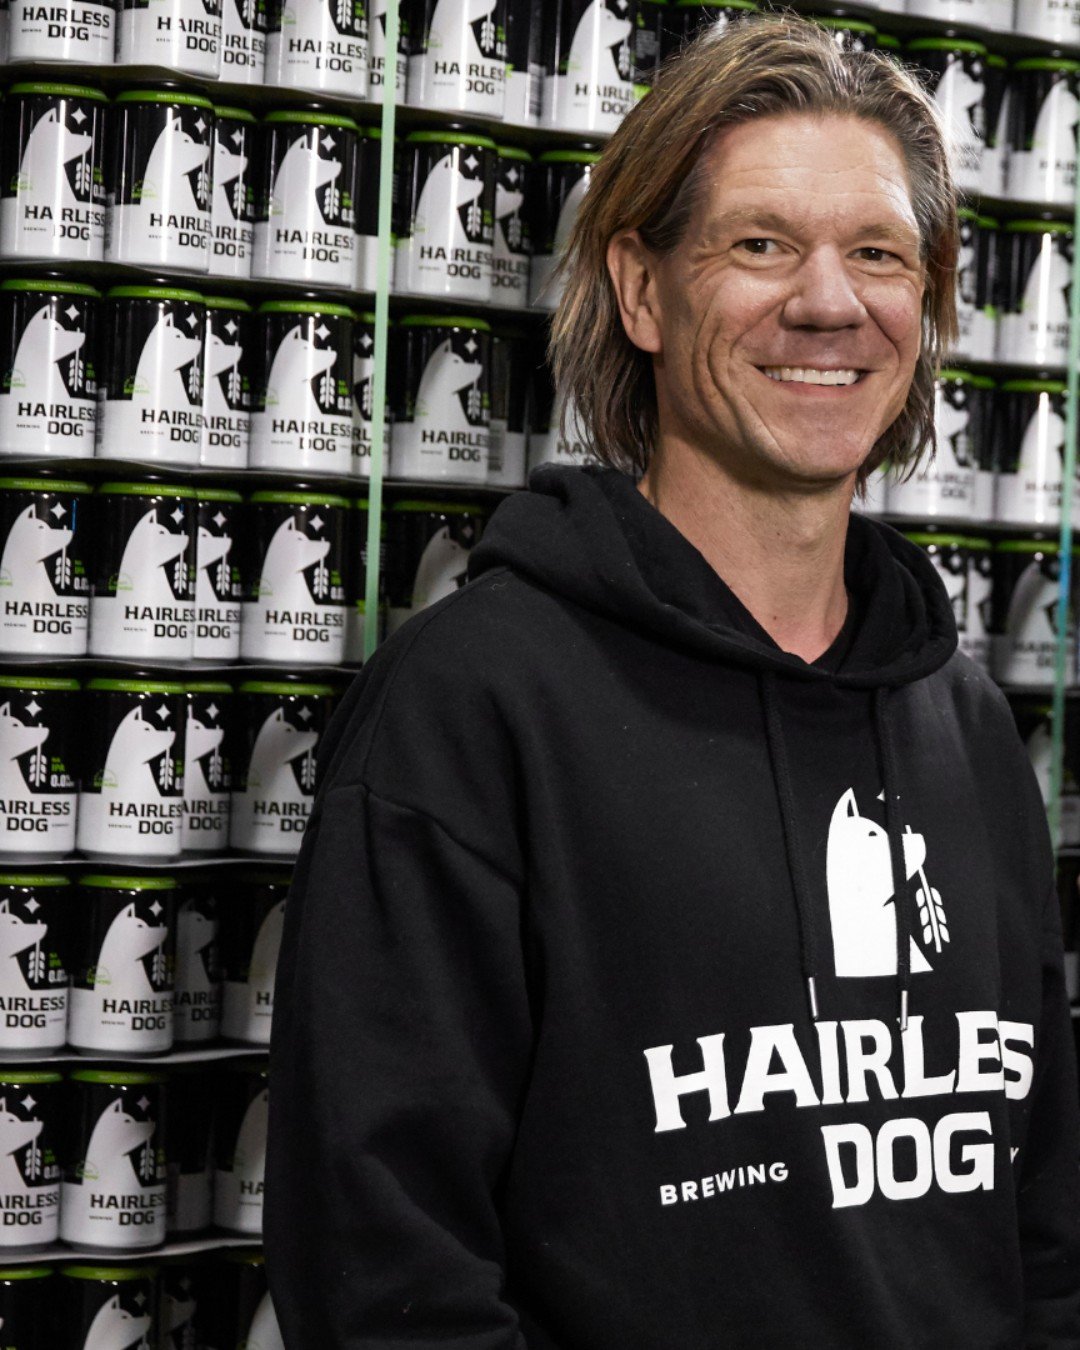 East Bde Maka Ska resident Paul Pirner is leading the local non-alcoholic beer movement with his brewing company, Hairless Dog. (Photo submitted)